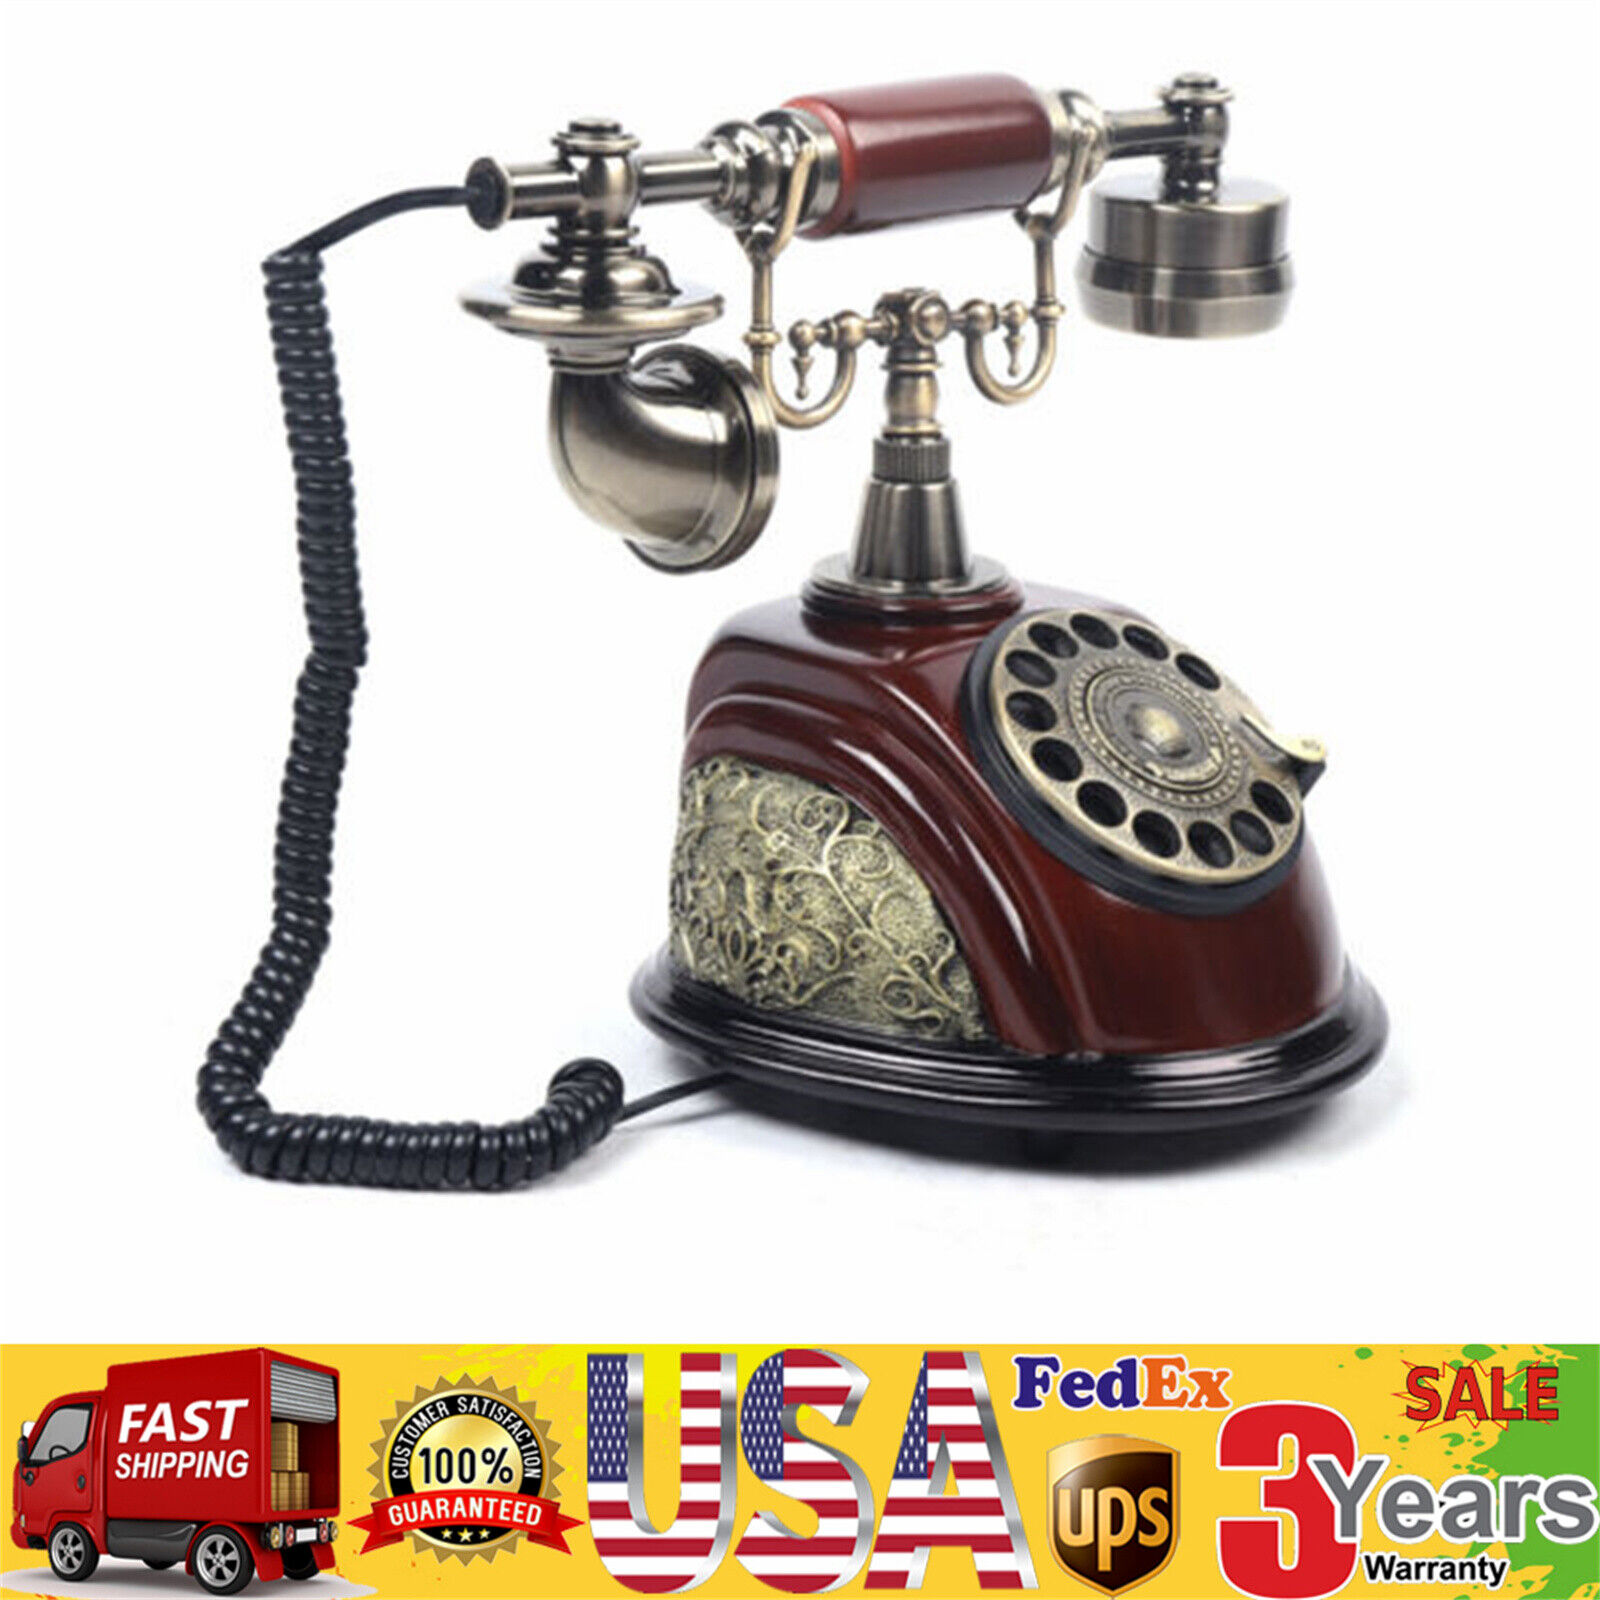 Vintage Rotary Dial Telephone Phone Working Vintage Retro Old Fashion Telephone 